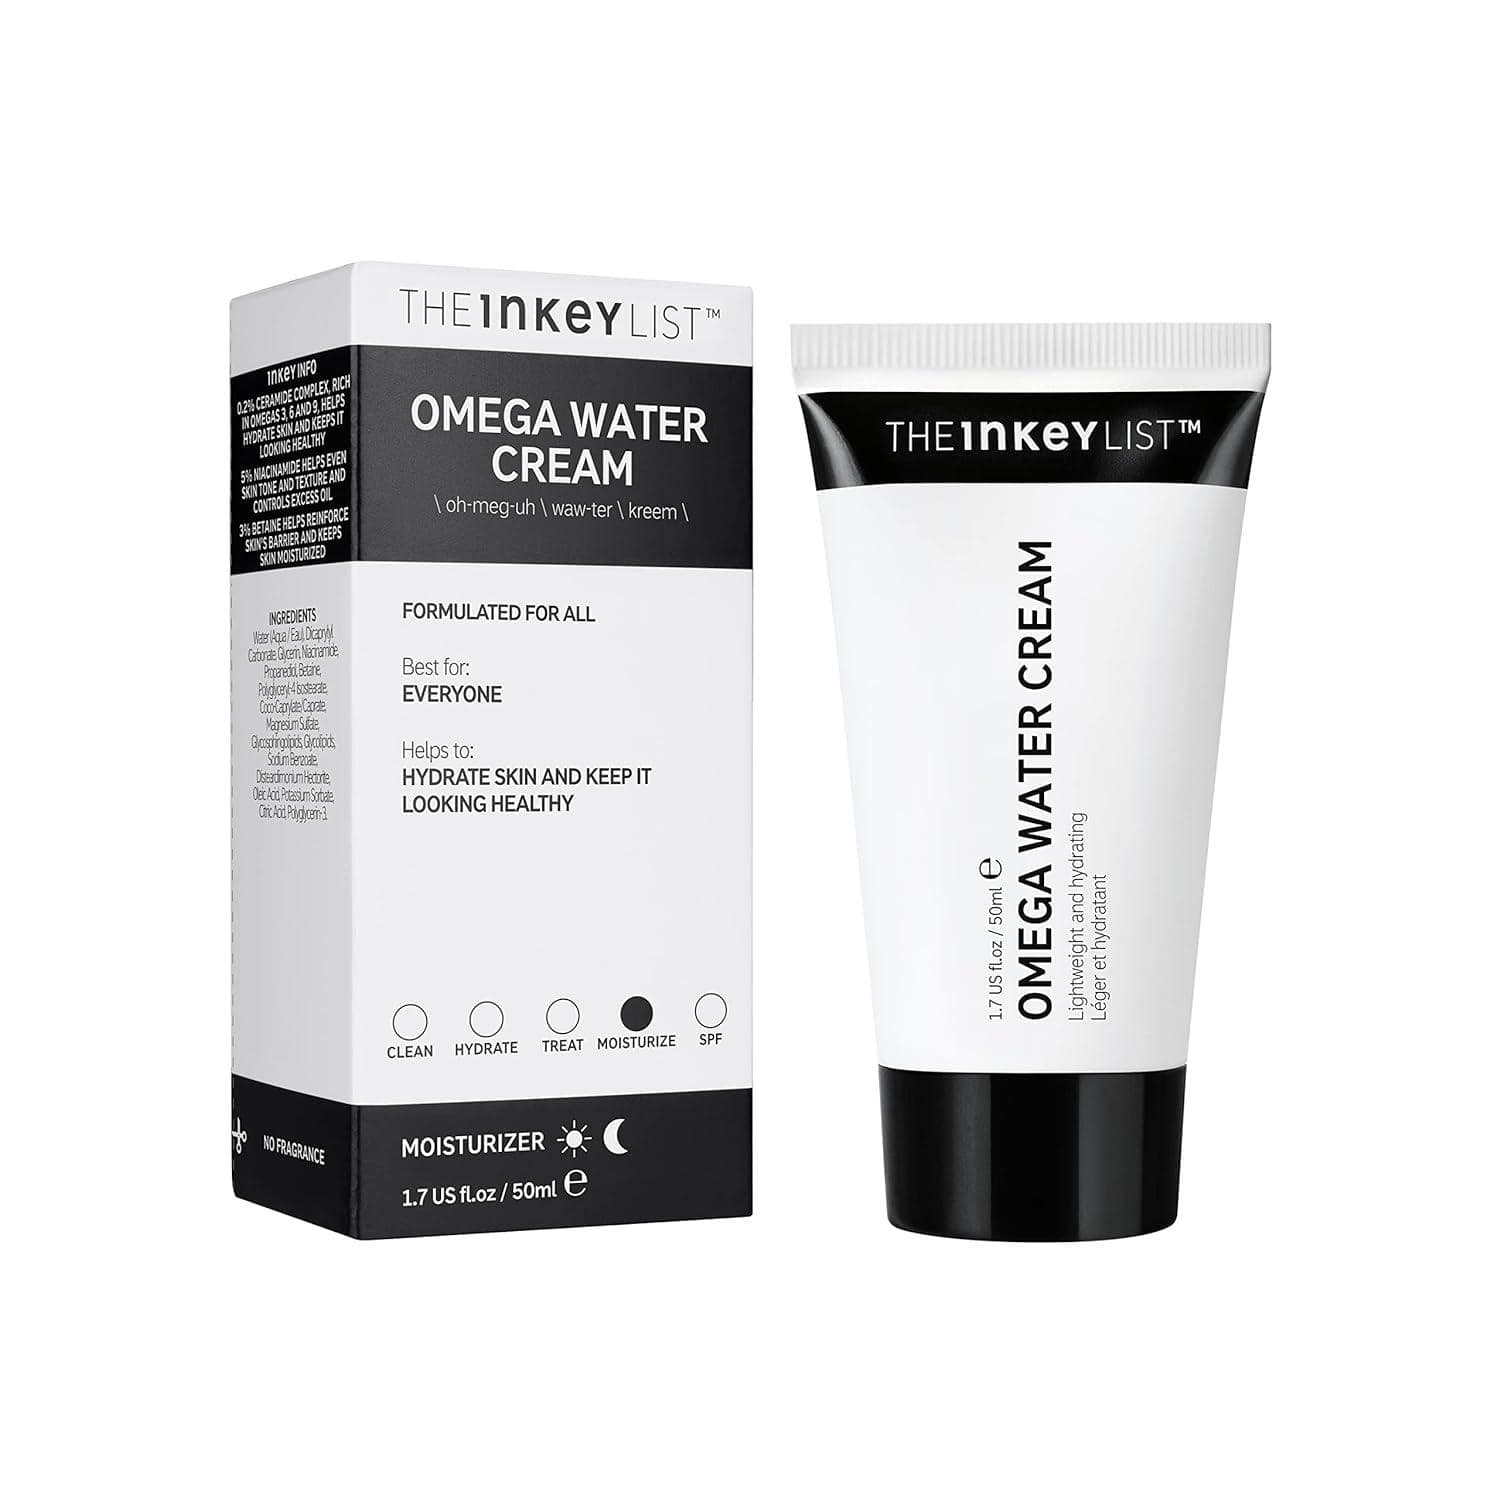 Inkey List Omega Water Cream is my go-to for Moisturizers for Oily Skin, offering a budget-friendly option with its lightweight formula,featuring niacinamide, a hydrating ceramide complex, and betaine for impressive hydration without feeling greasy.